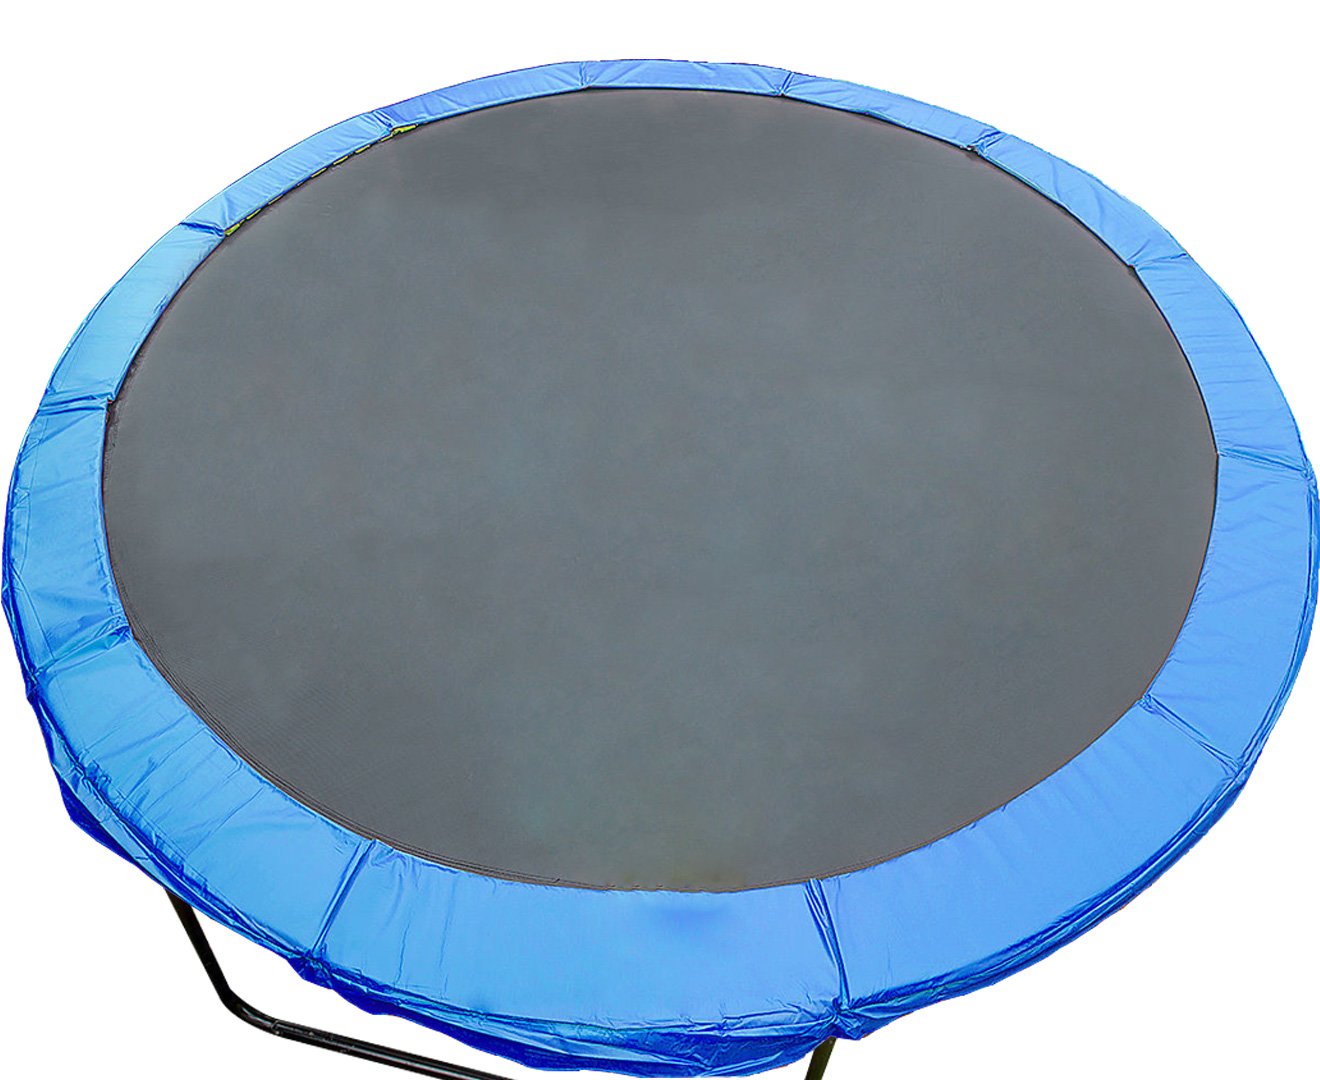 14 ft Replacement Trampoline Safety Spring Pad Cover 1